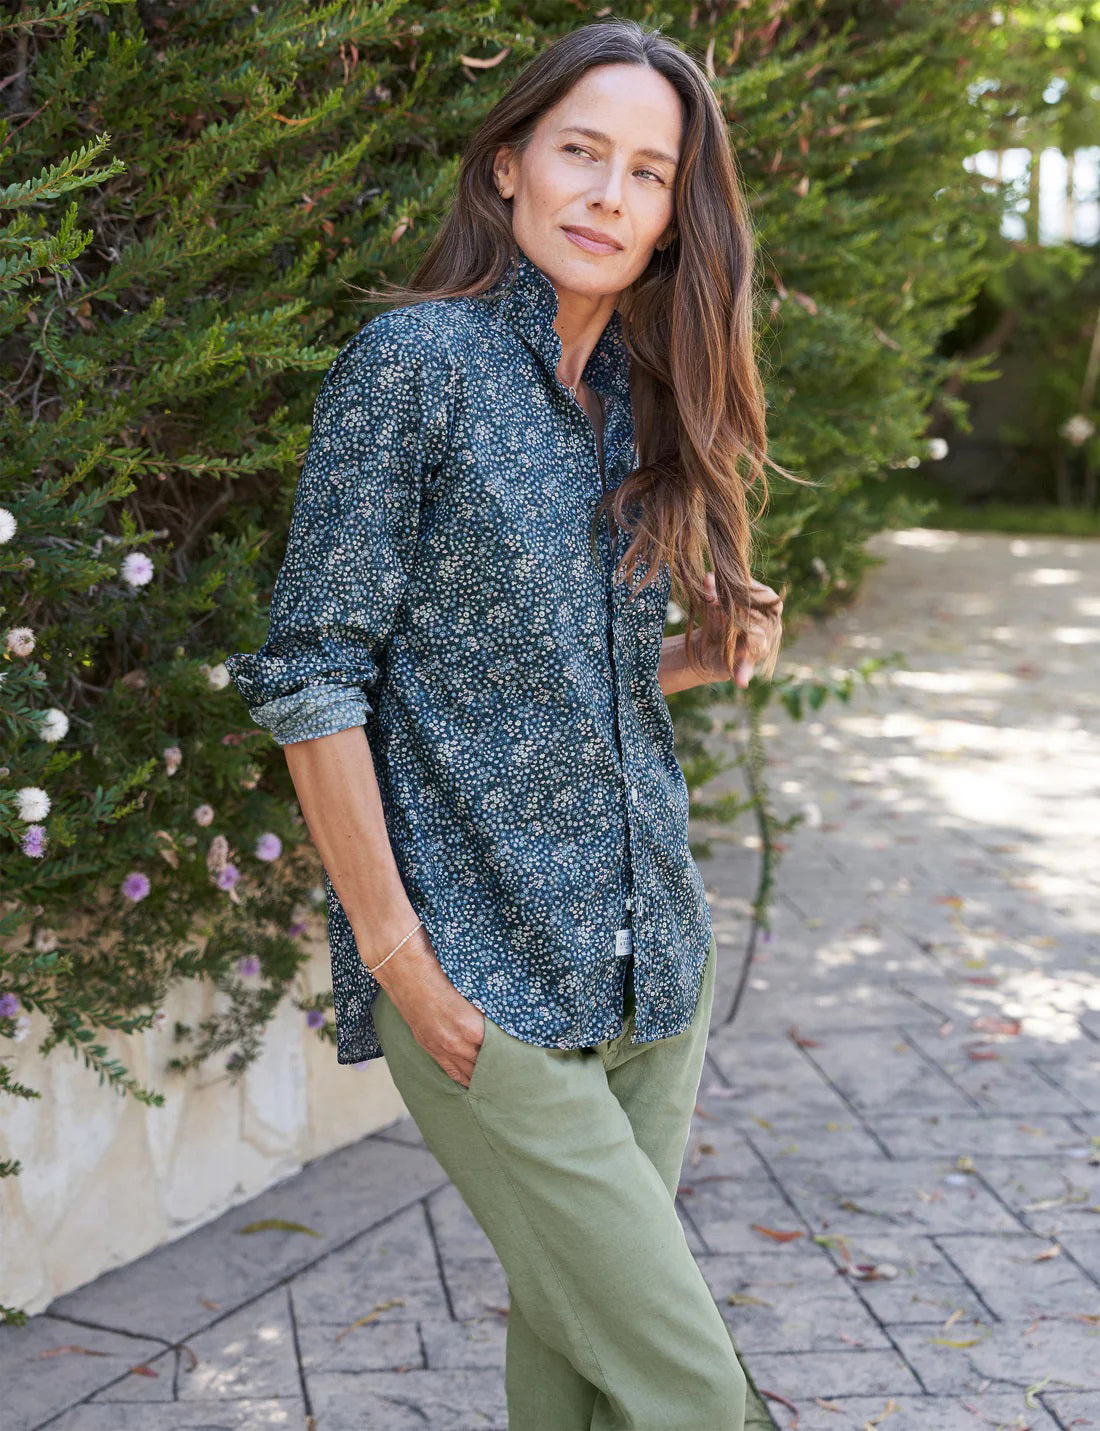 FRANK AND EILEEN - FRANK CLASSIC BUTTON UP IN LIBERTY